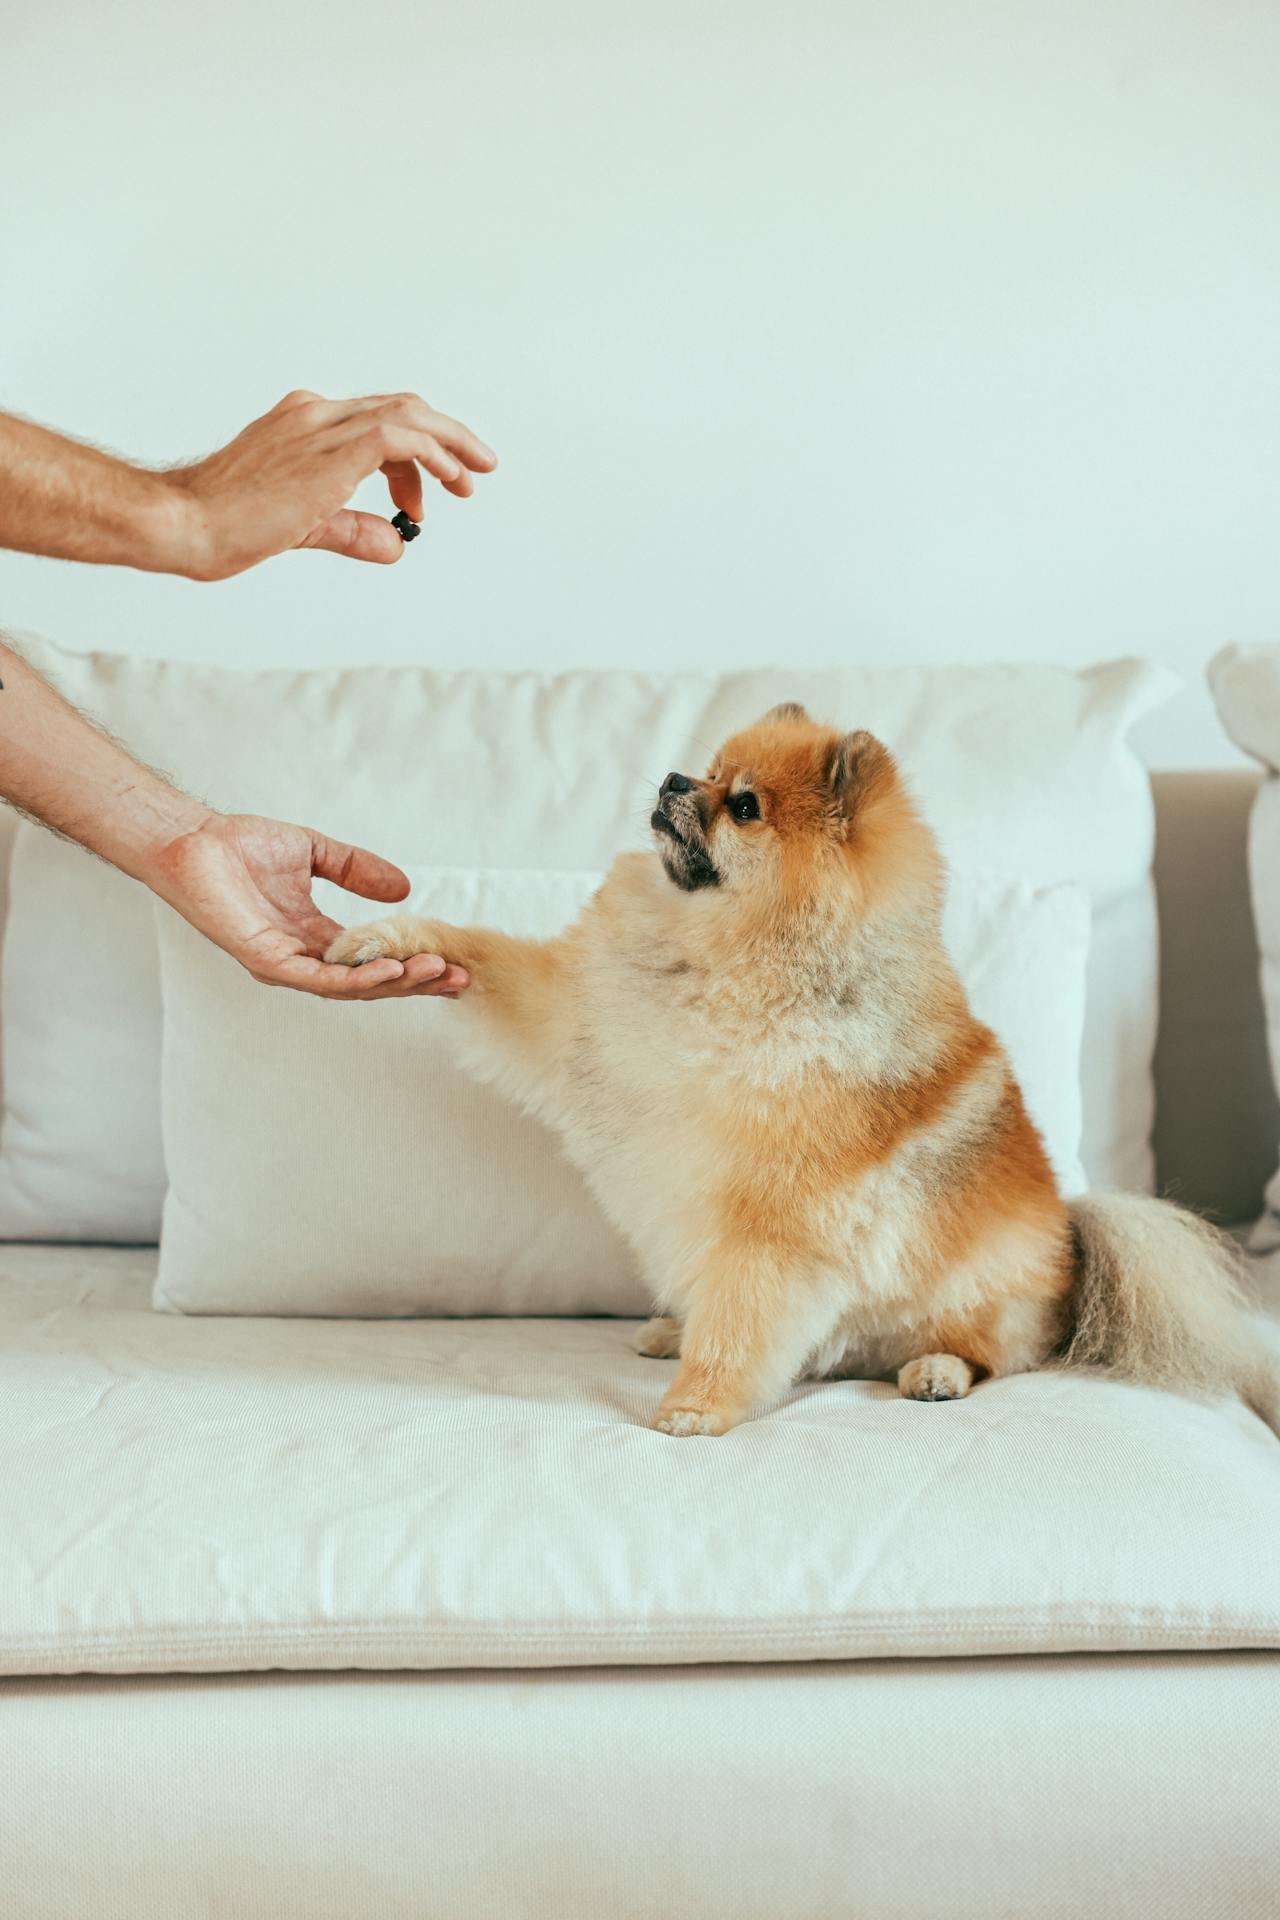 Puppy giving paw